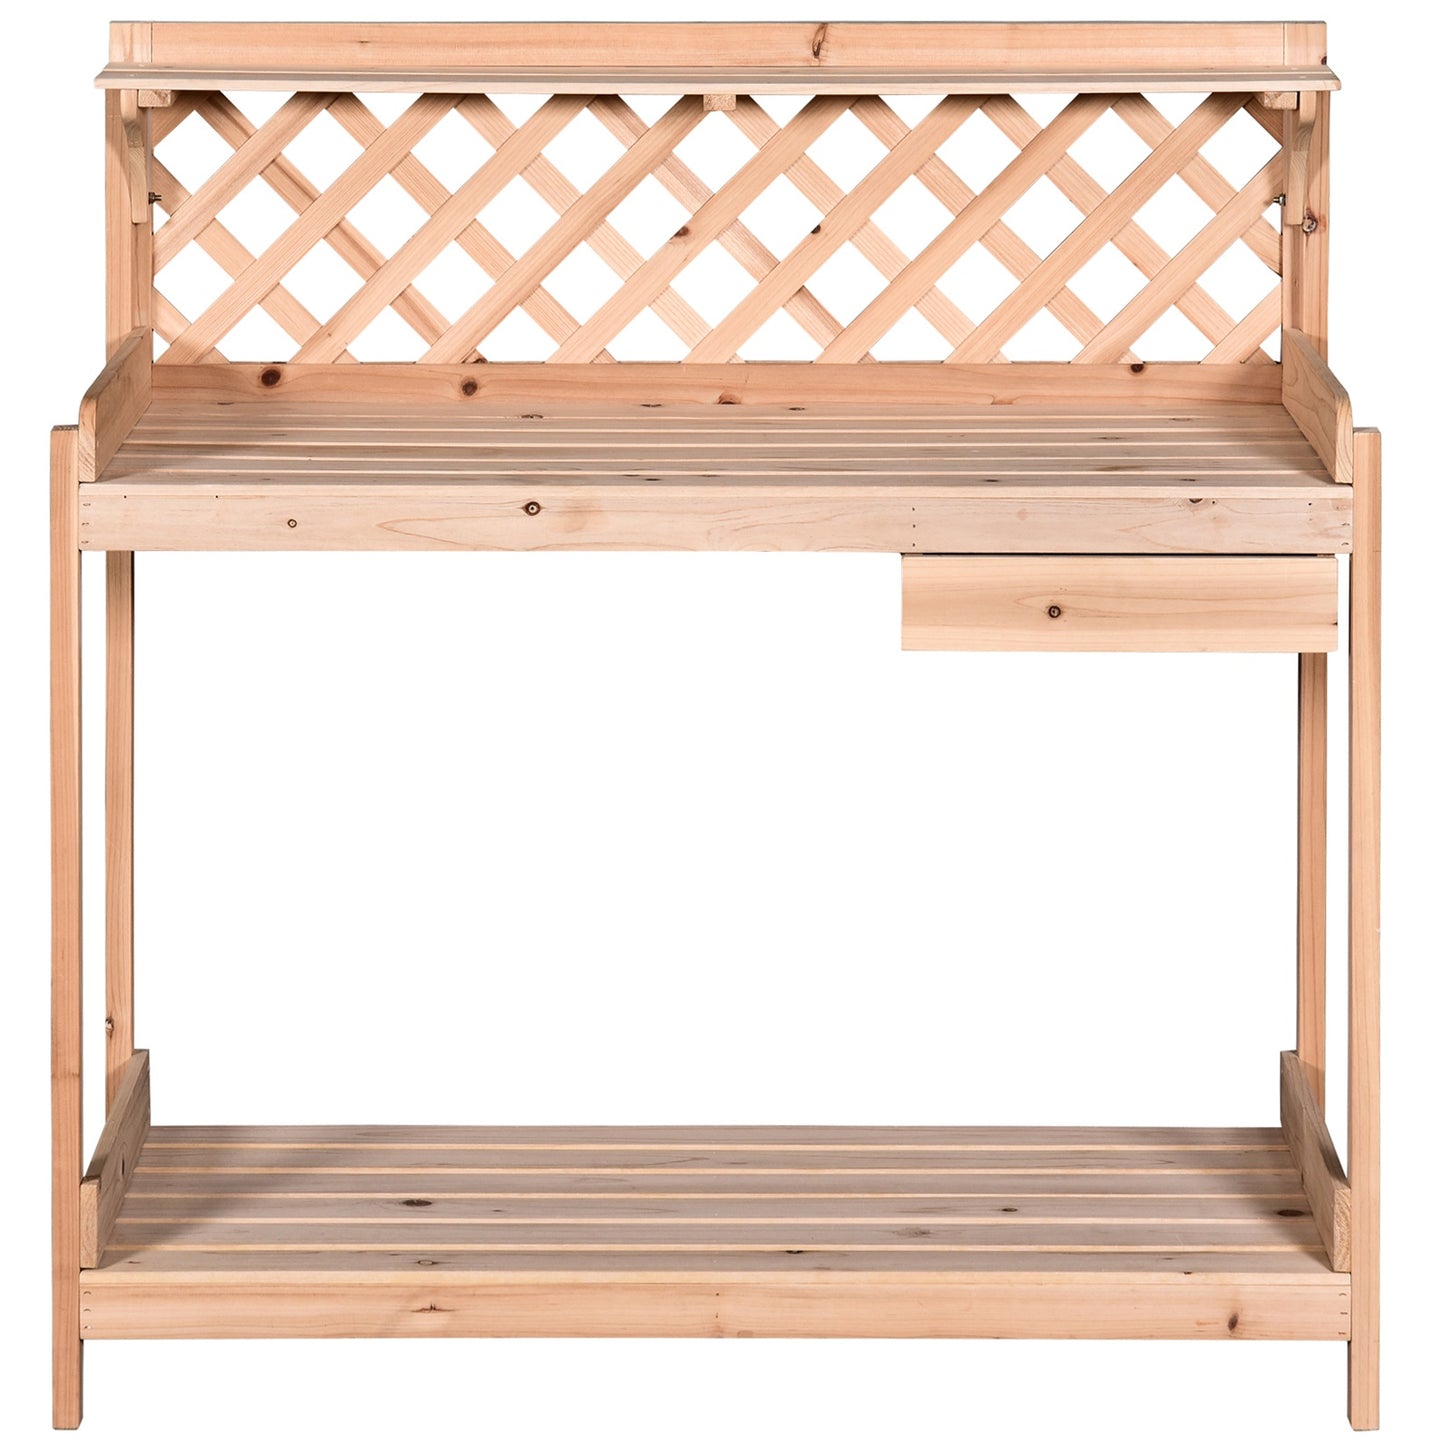 Outsunny Fir Wood Outdoor Garden Potting Table w/ Drawer